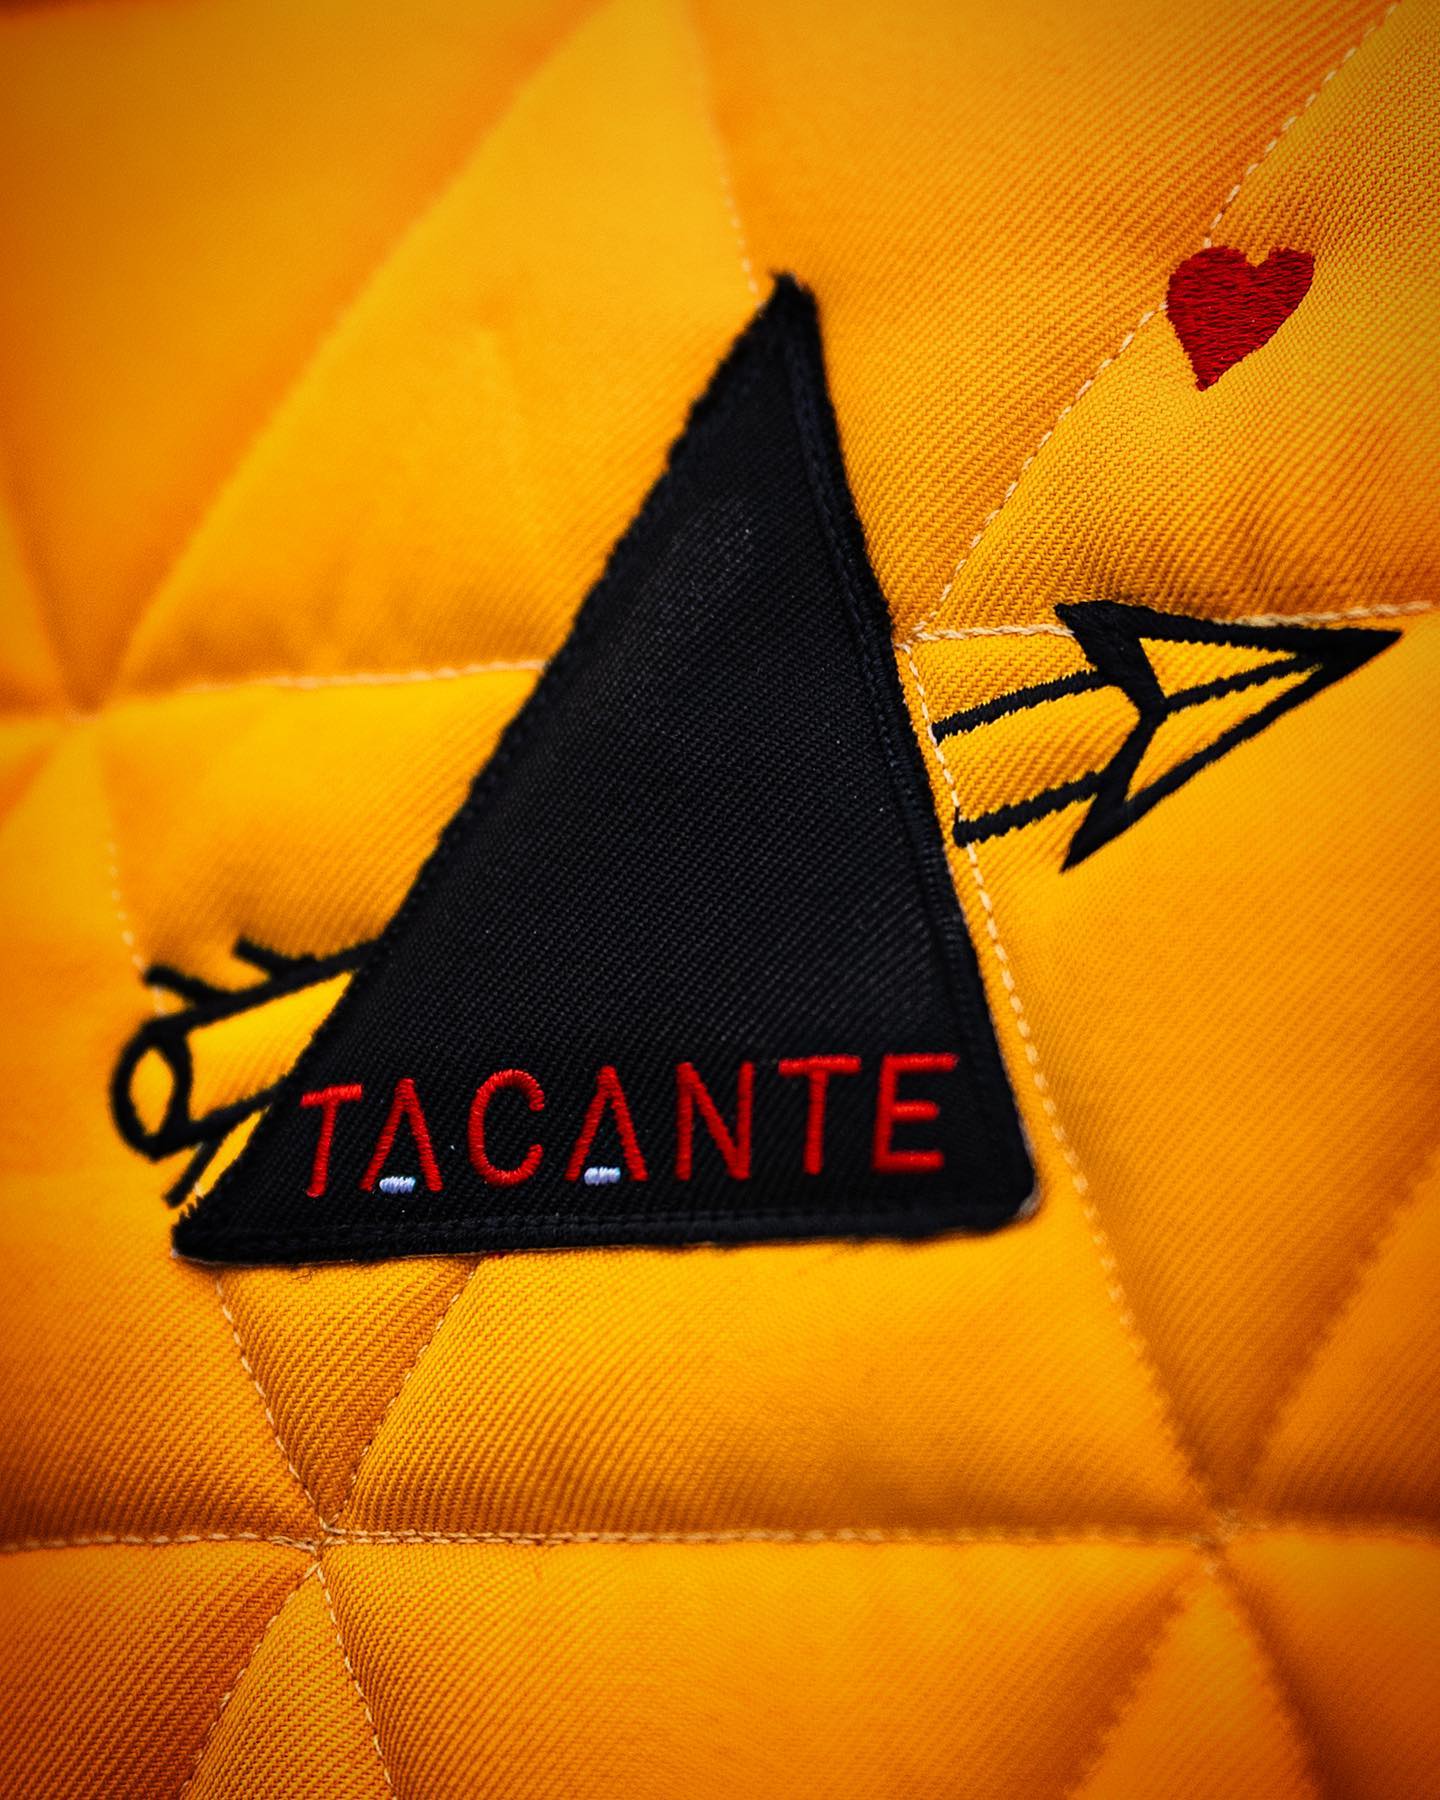 Rock’n Love limited edition 🎸❤️‍🔥🖤💛
📸 @hpalprod 
//
#tacante #tacantefamily #sustainable #madeinfrance #tapisdeselle #ecofriendly #equestrianstyle #equestrianlife  #yellow #rock